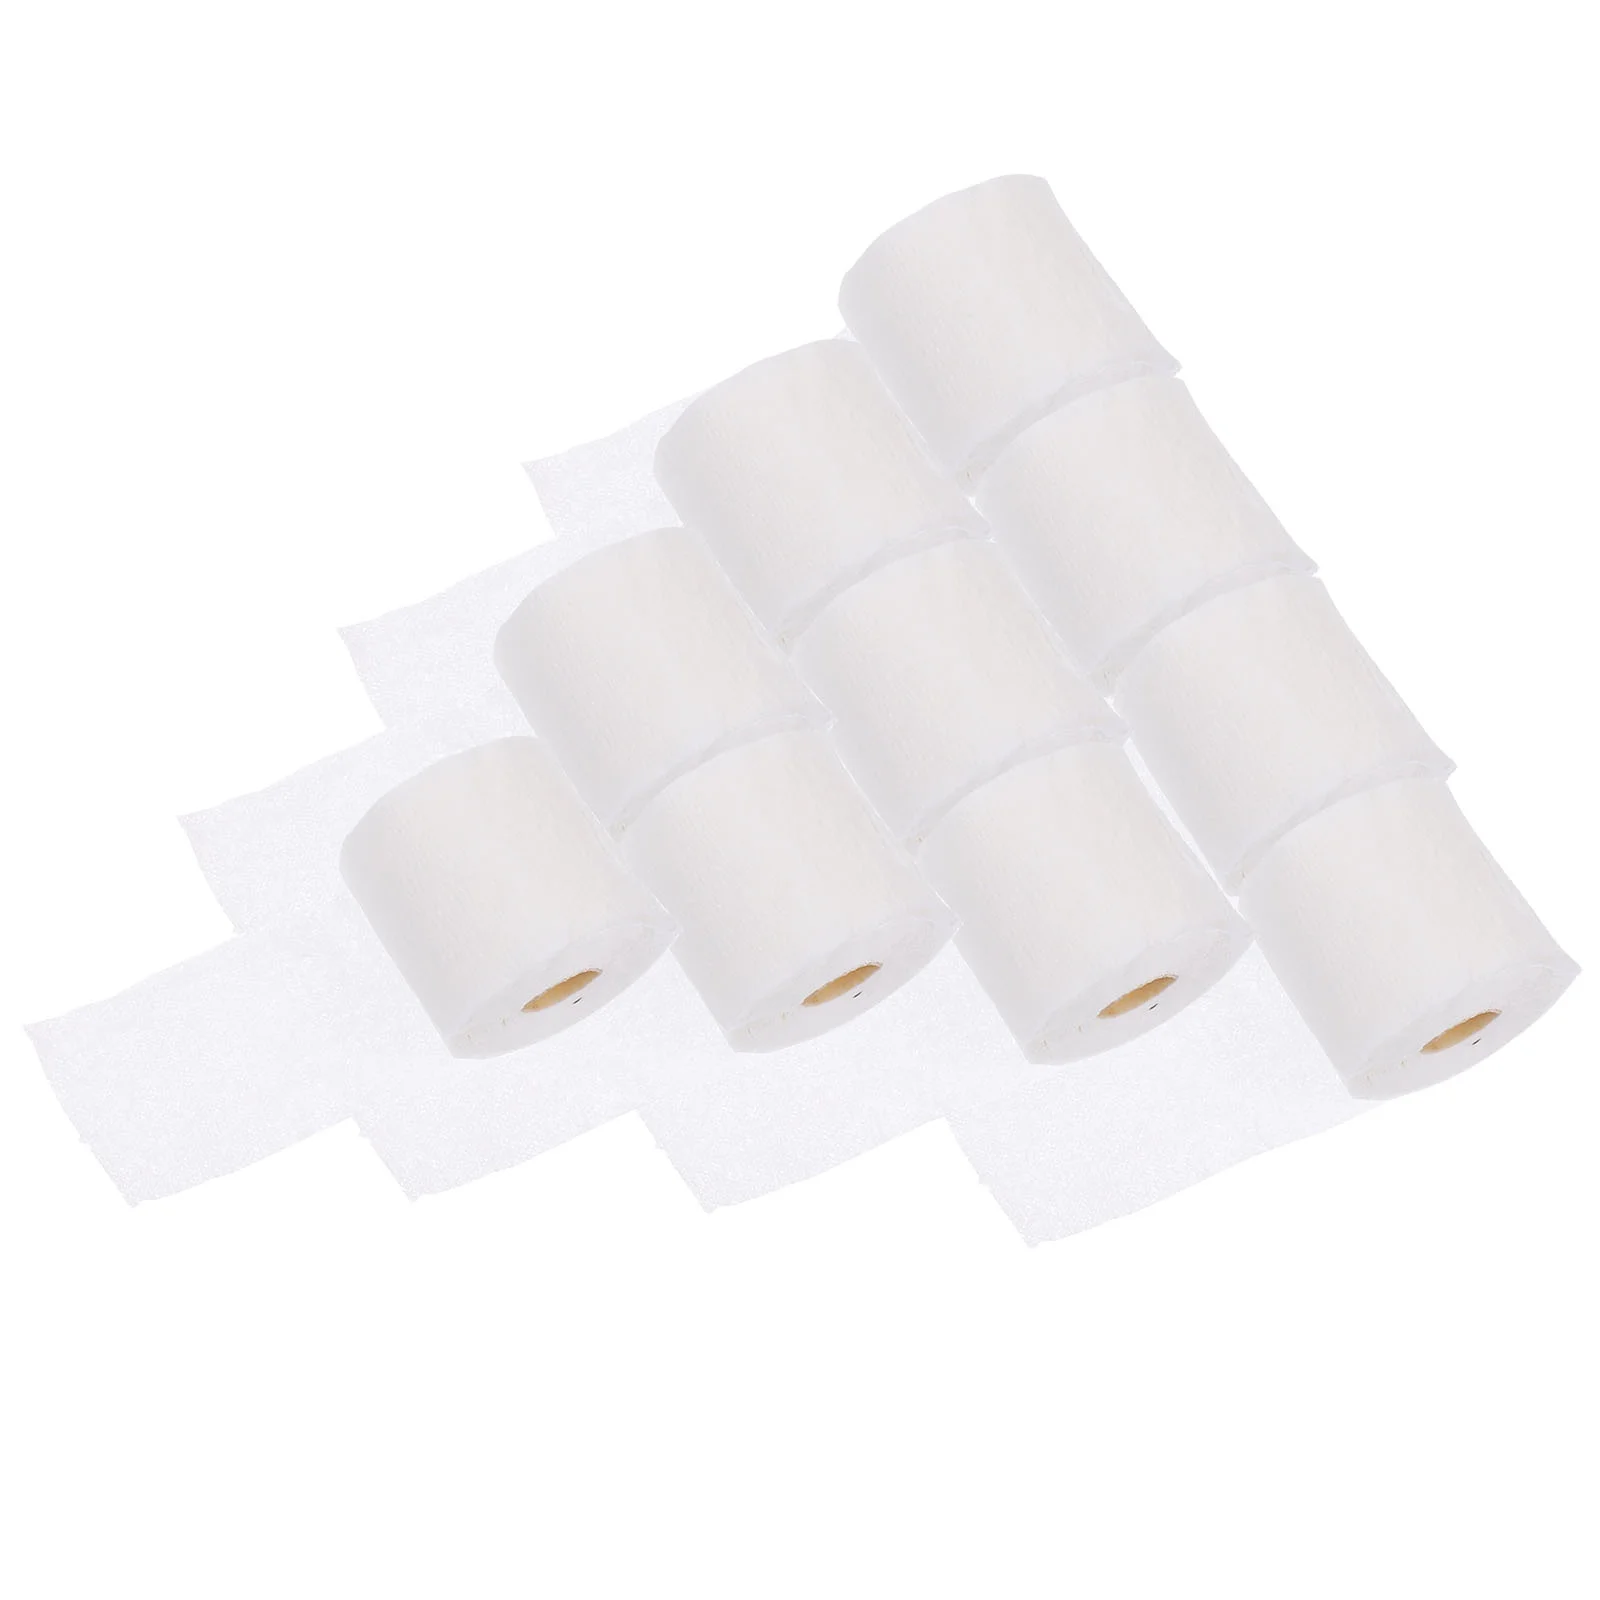 

10 Pcs Miniatures Tube Accessory Tissue Napkin Toy Towels Roll Layout